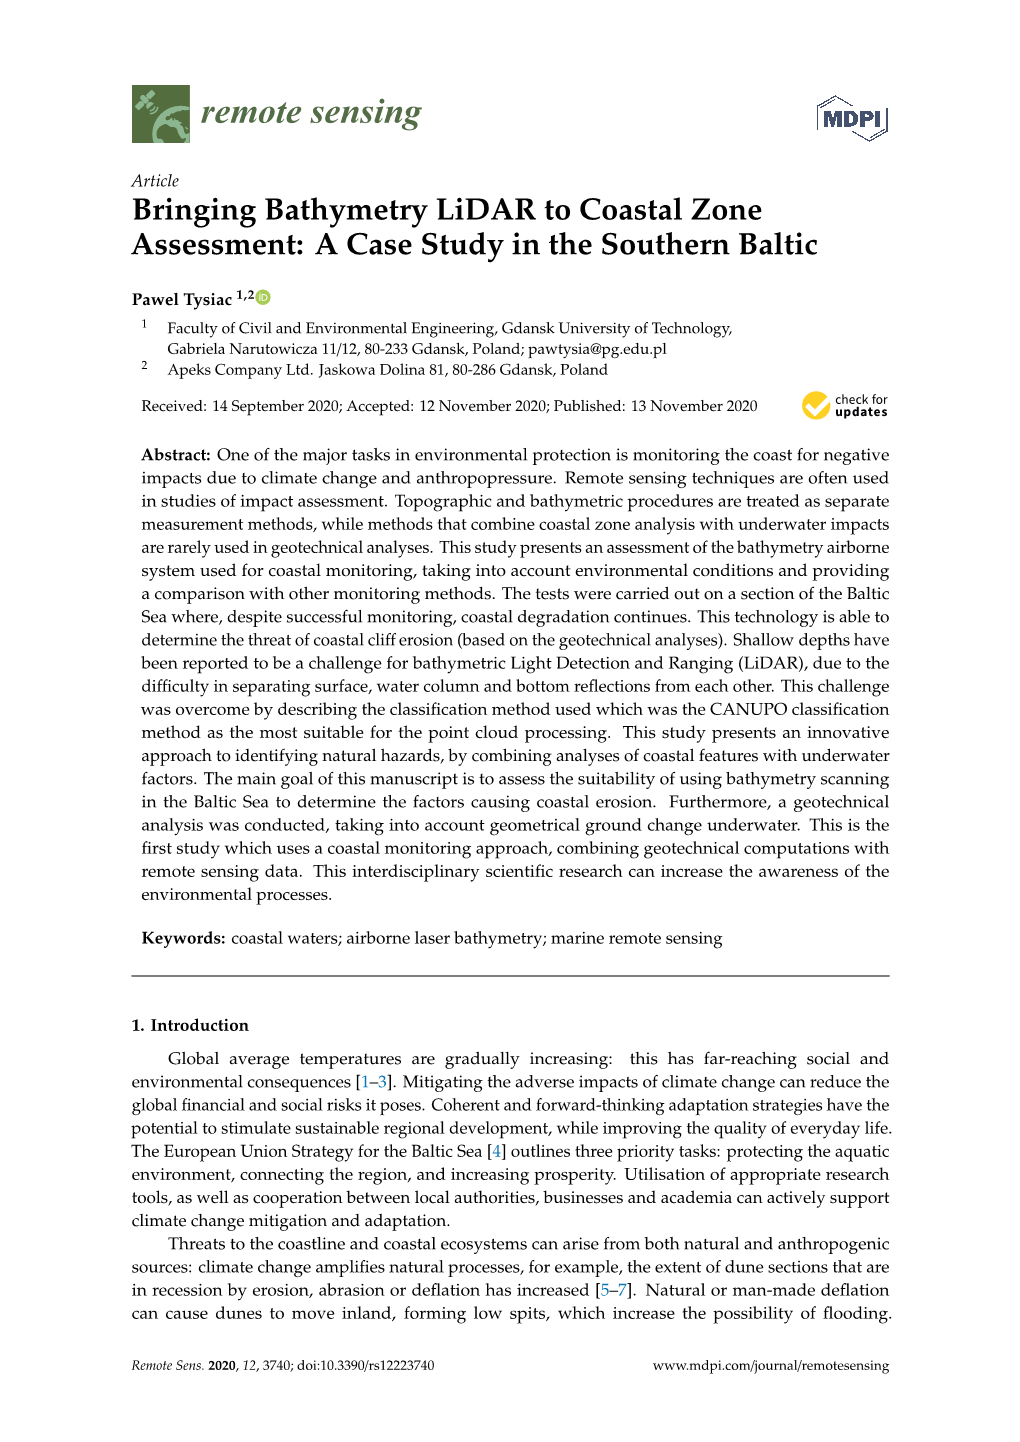 Bringing Bathymetry Lidar to Coastal Zone Assessment: a Case Study in the Southern Baltic